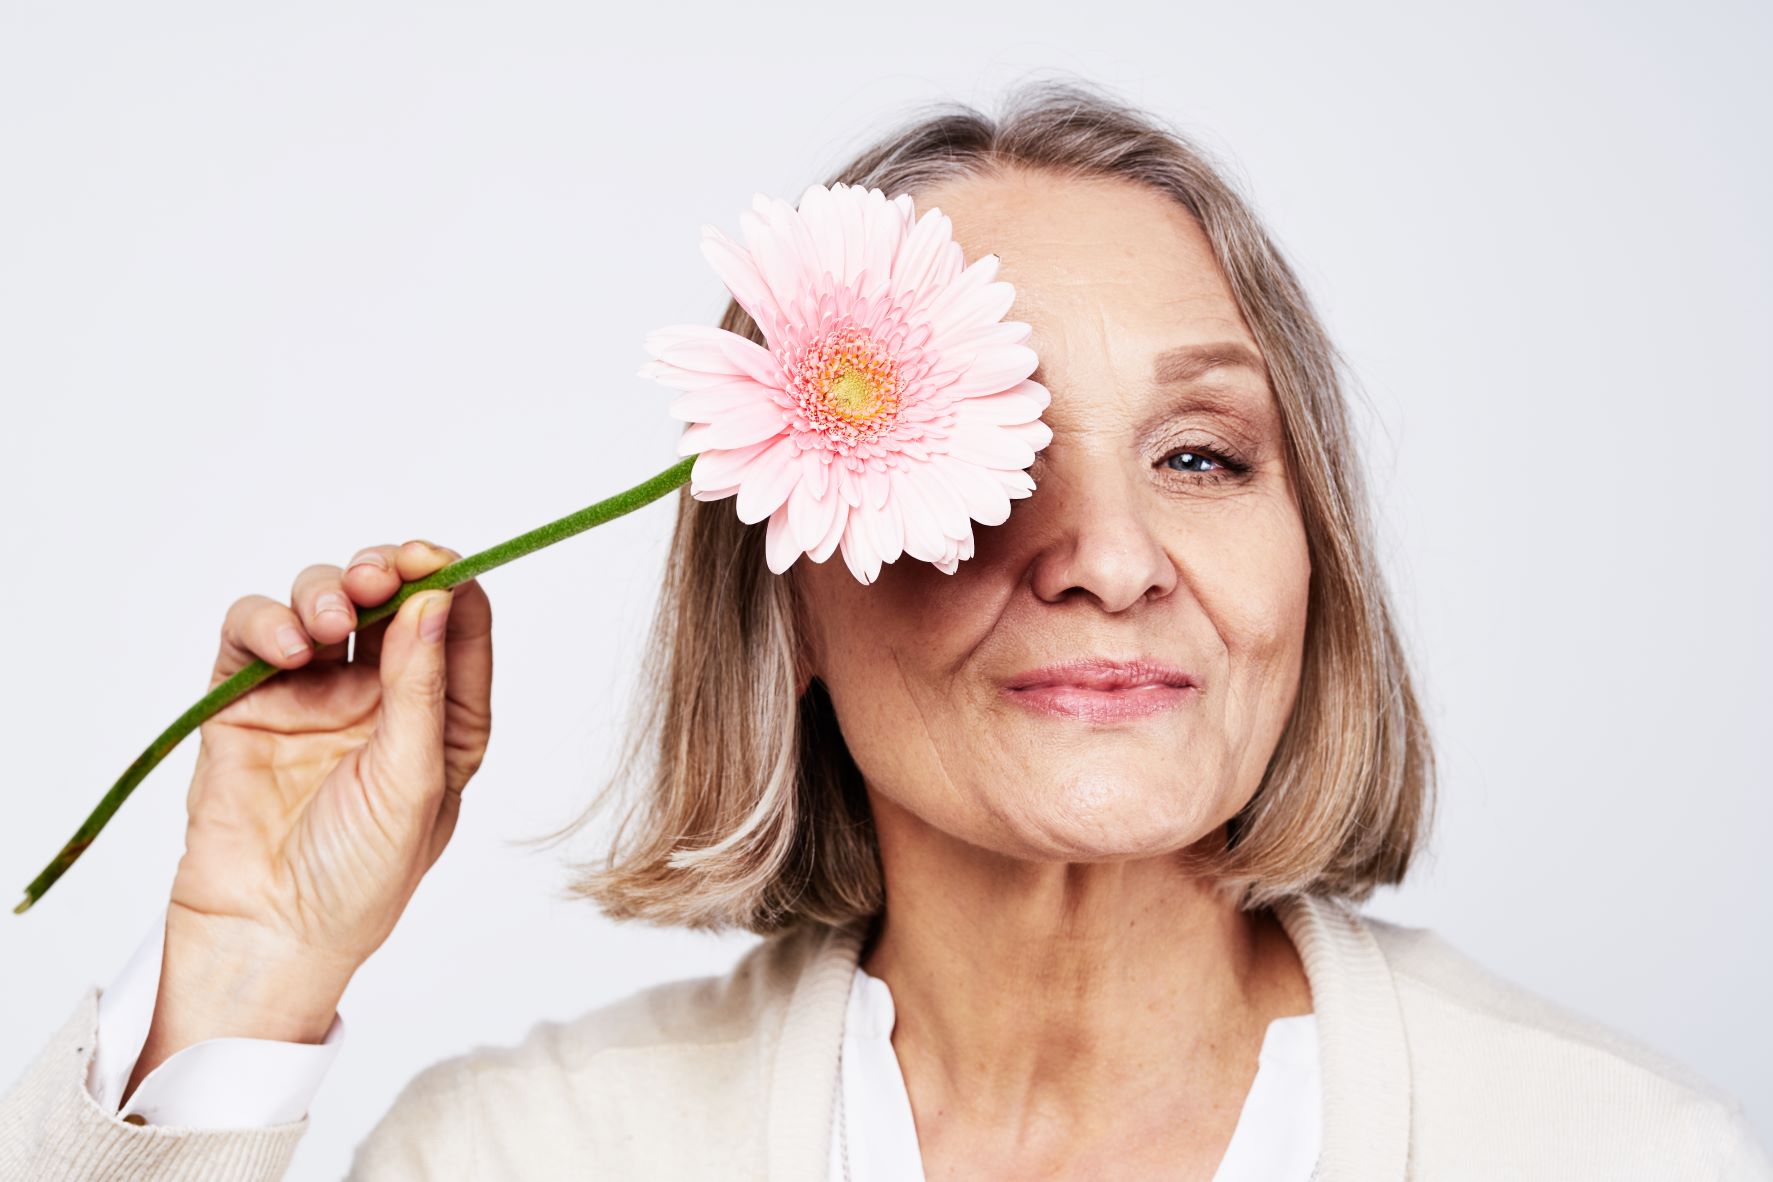 menopausal woman holding a pink flower in from of face